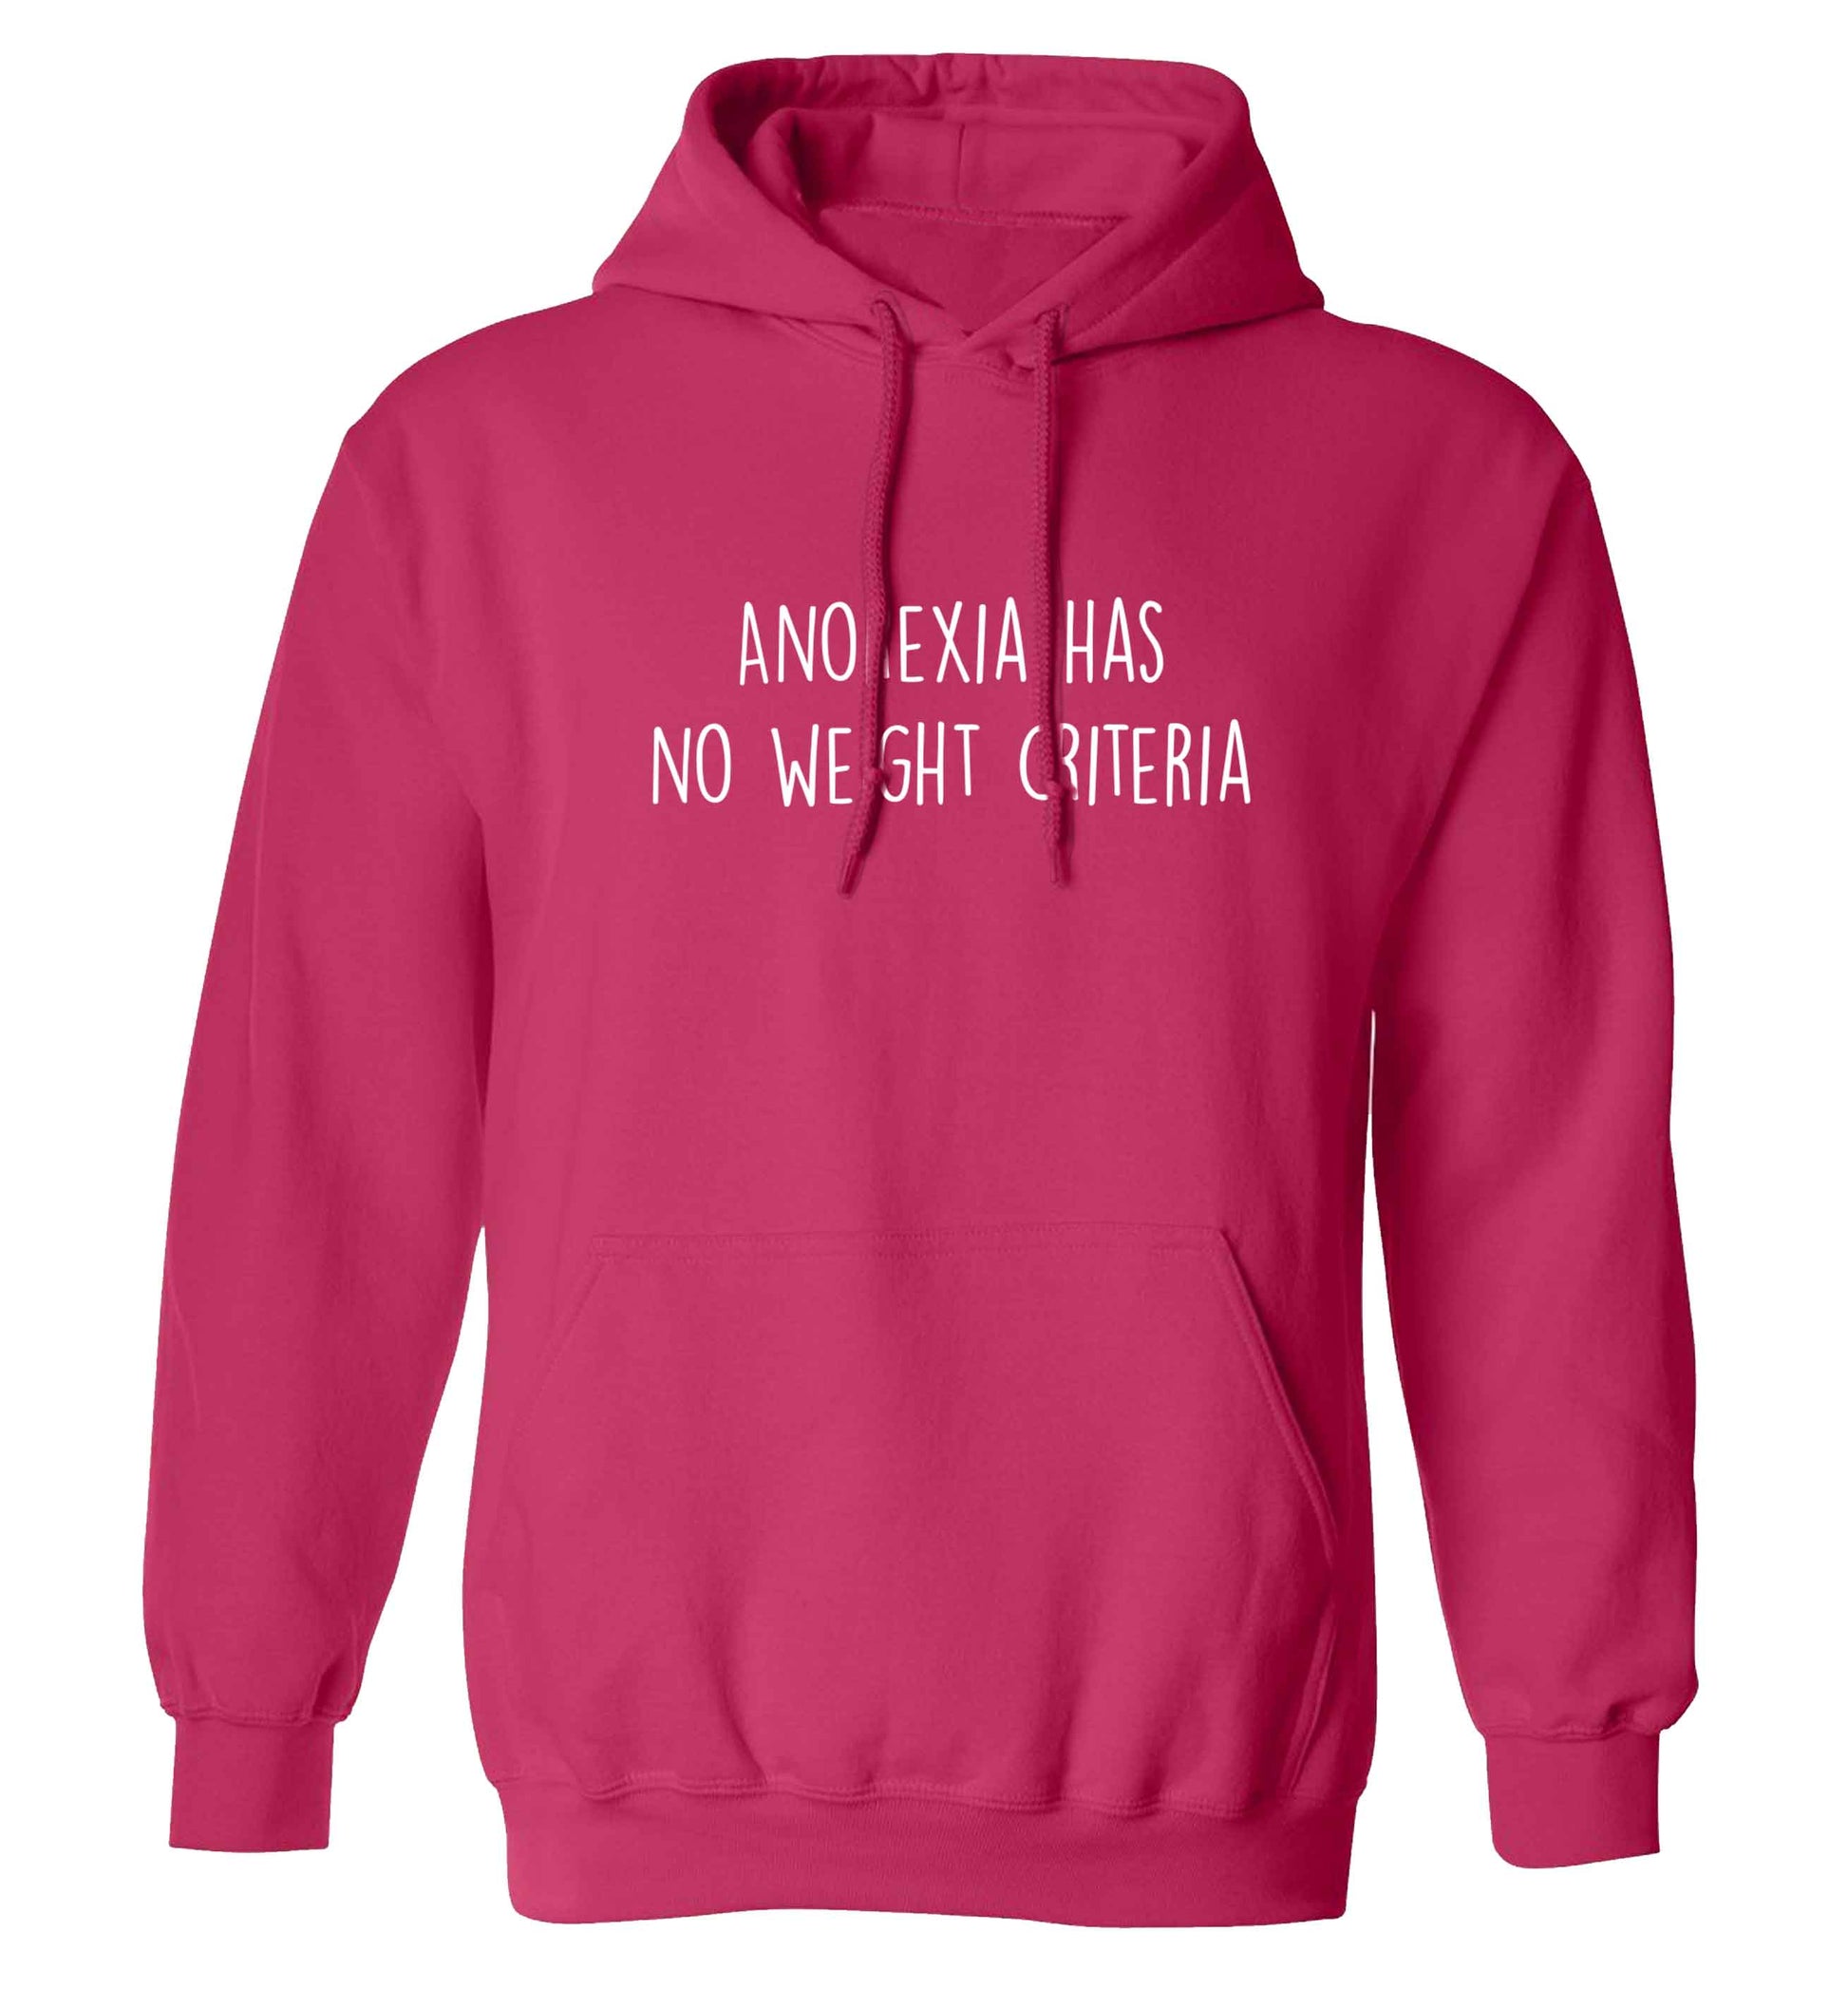 Anorexia has no weight criteria adults unisex pink hoodie 2XL